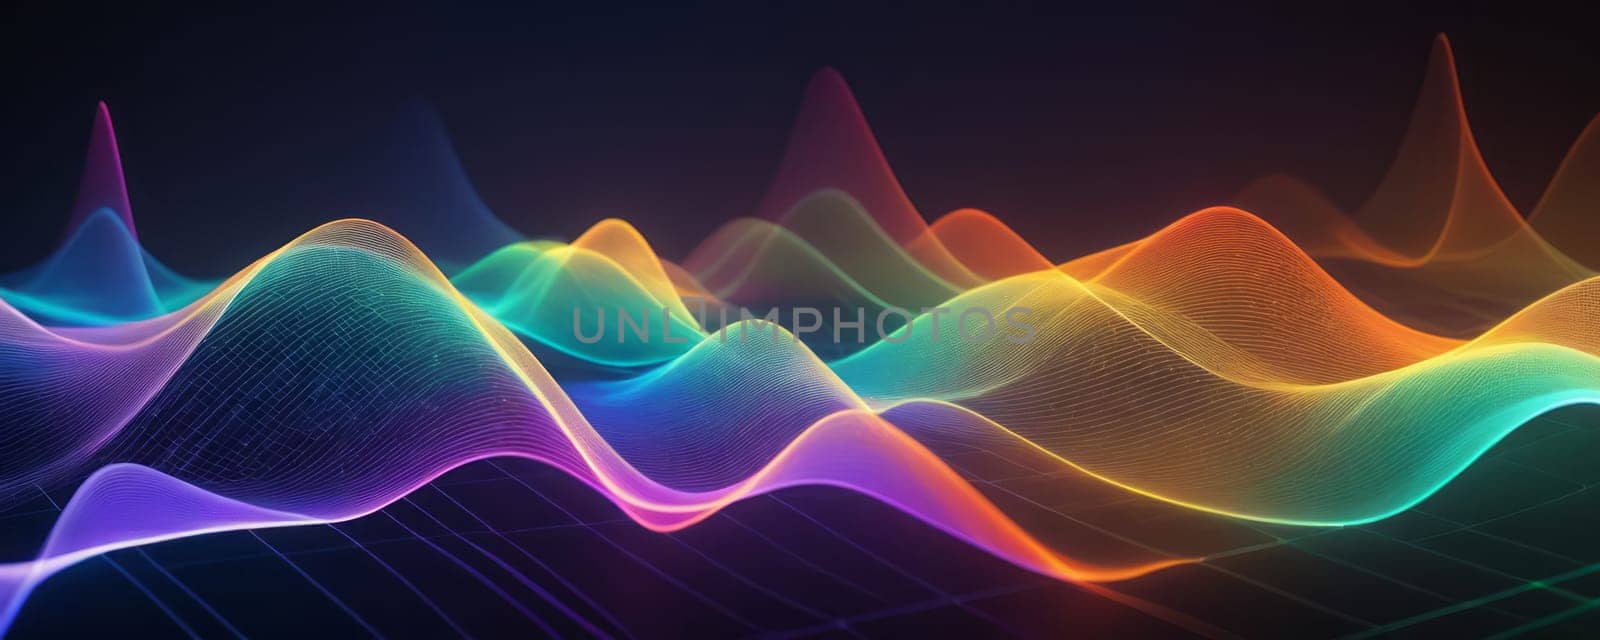 The image presents a dynamic and colorful digital waveform. It features multiple peaks and troughs, creating a rhythmic pattern. The waves are illuminated with gradient colors, including shades of blue, green, yellow, orange, and purple, and each wave is outlined with a bright hue that accentuates its shape against the dark background. The overall mood of the image is energetic and vibrant due to the bright colors and dynamic shapes. Generative AI